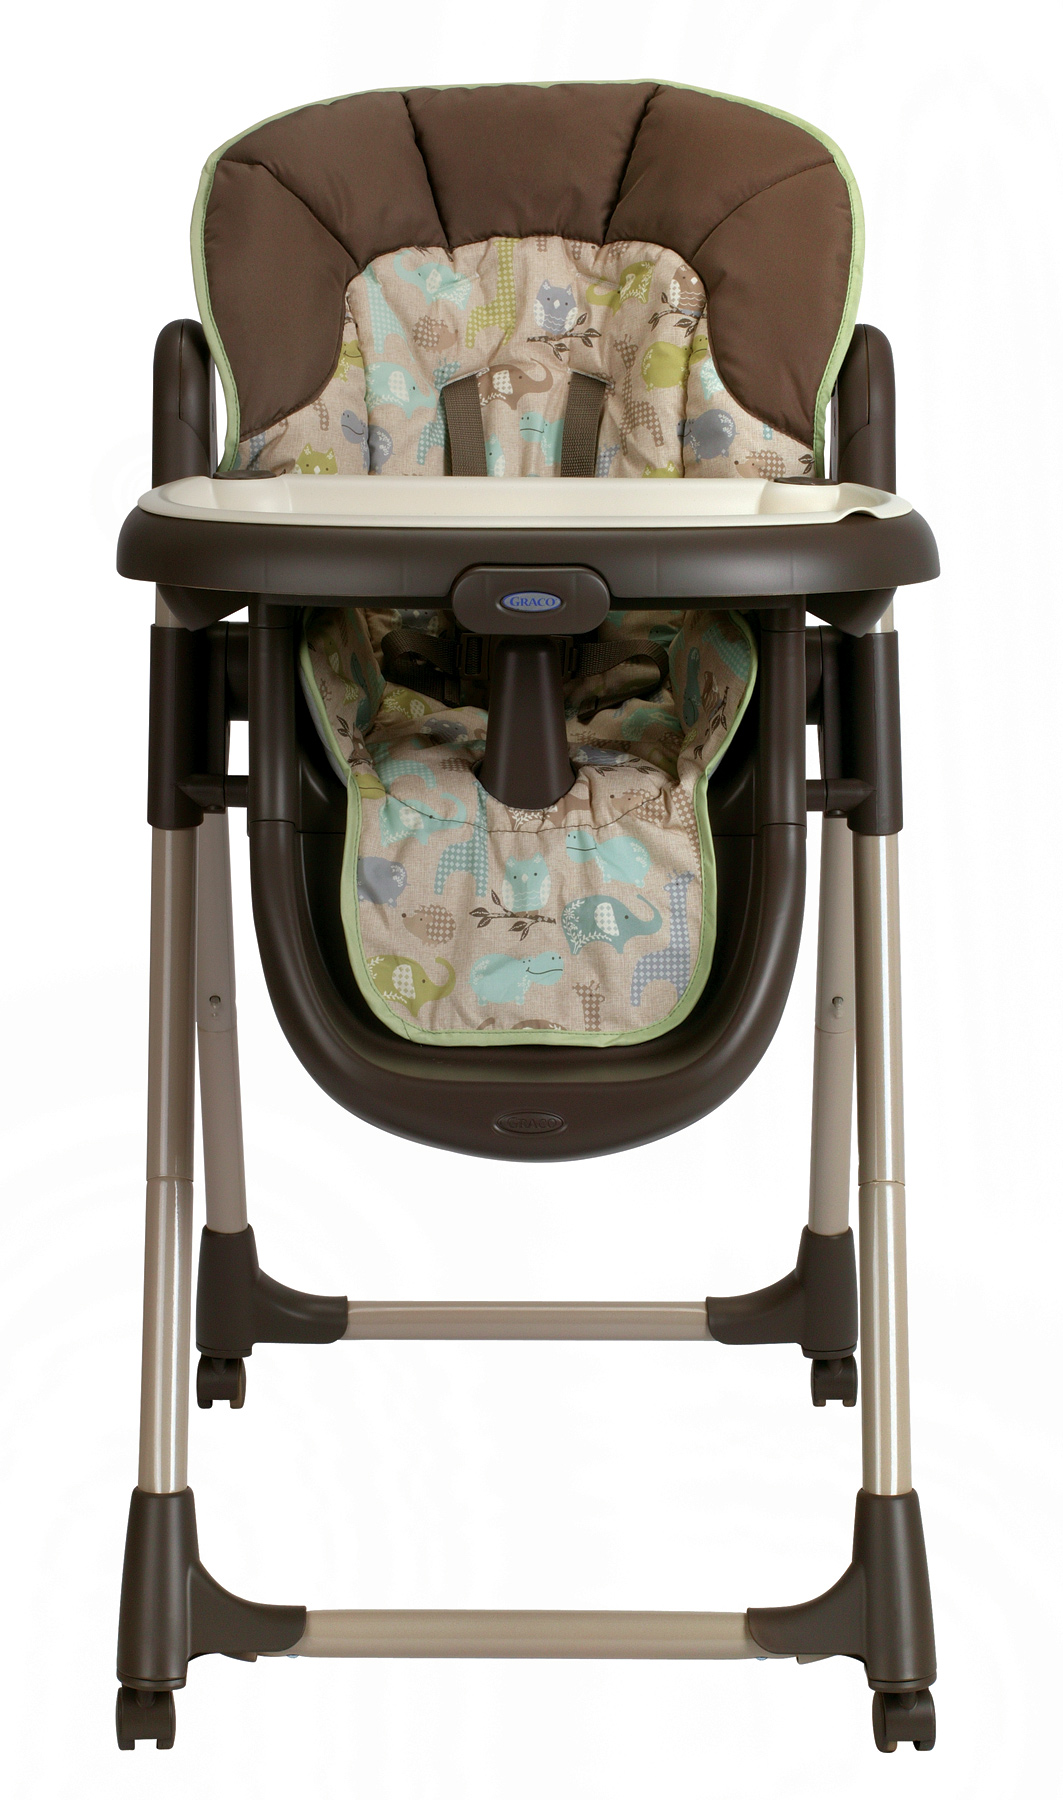 Graco Meal Time High Chair - Forest Friends